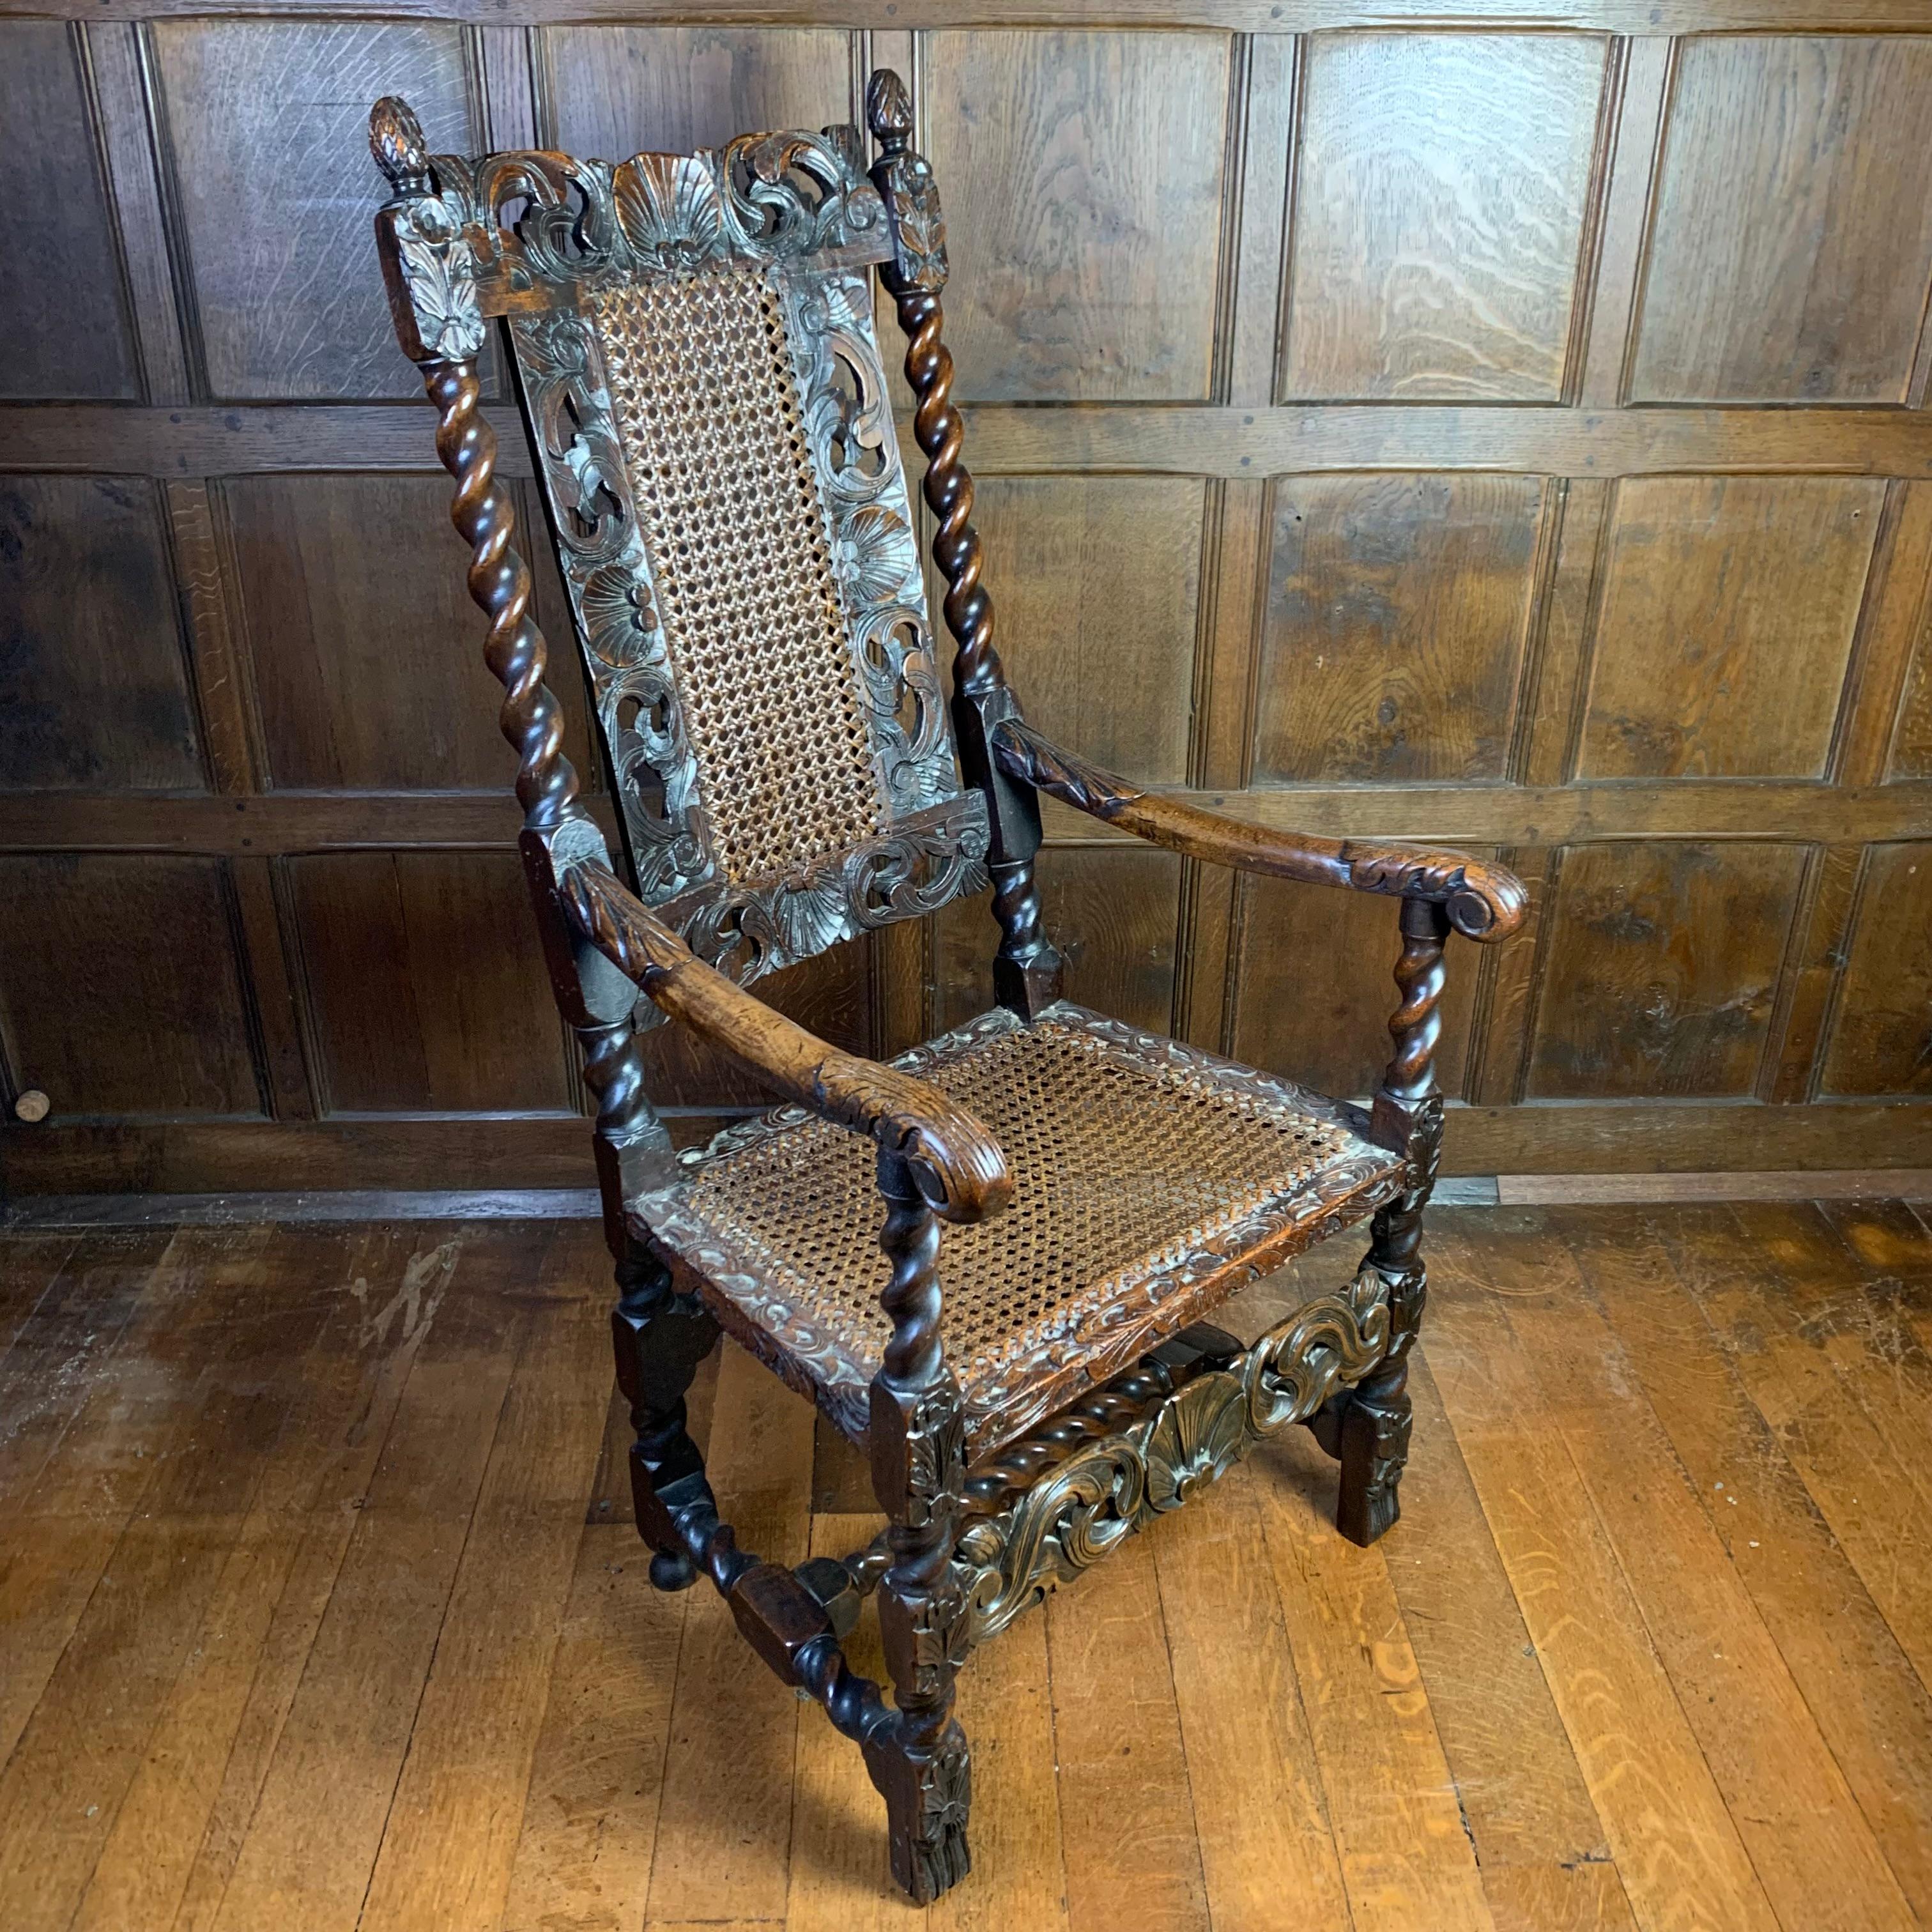 A well carved, high back, genuine 17th century Carolean walnut armchair, carved with flowerheads and foliate scrolls and a shell at the centre of the top rail, with caned back panels and seats. The chair dates to about 1680 and is in sound condition